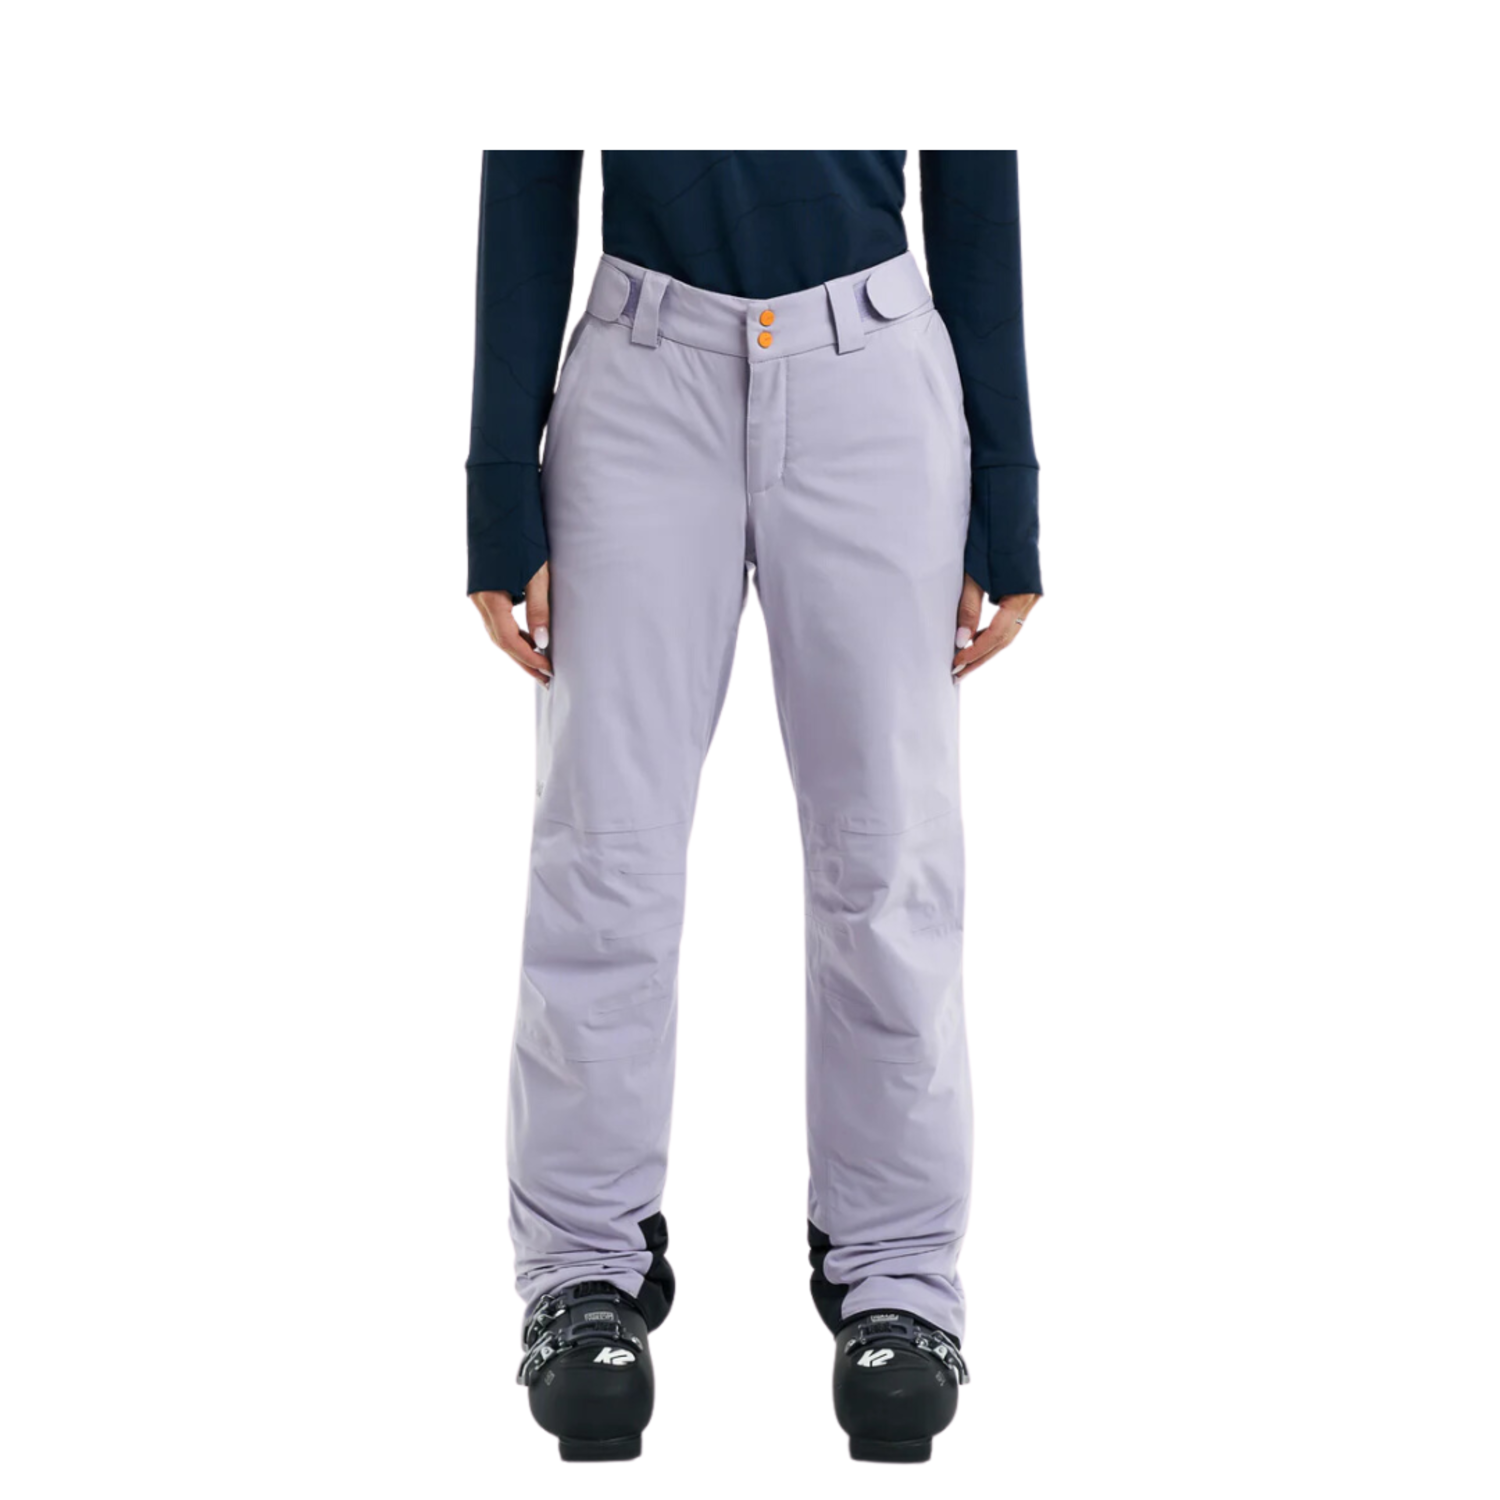 Orage Orage CHICA INSULATED Women's Snowpants